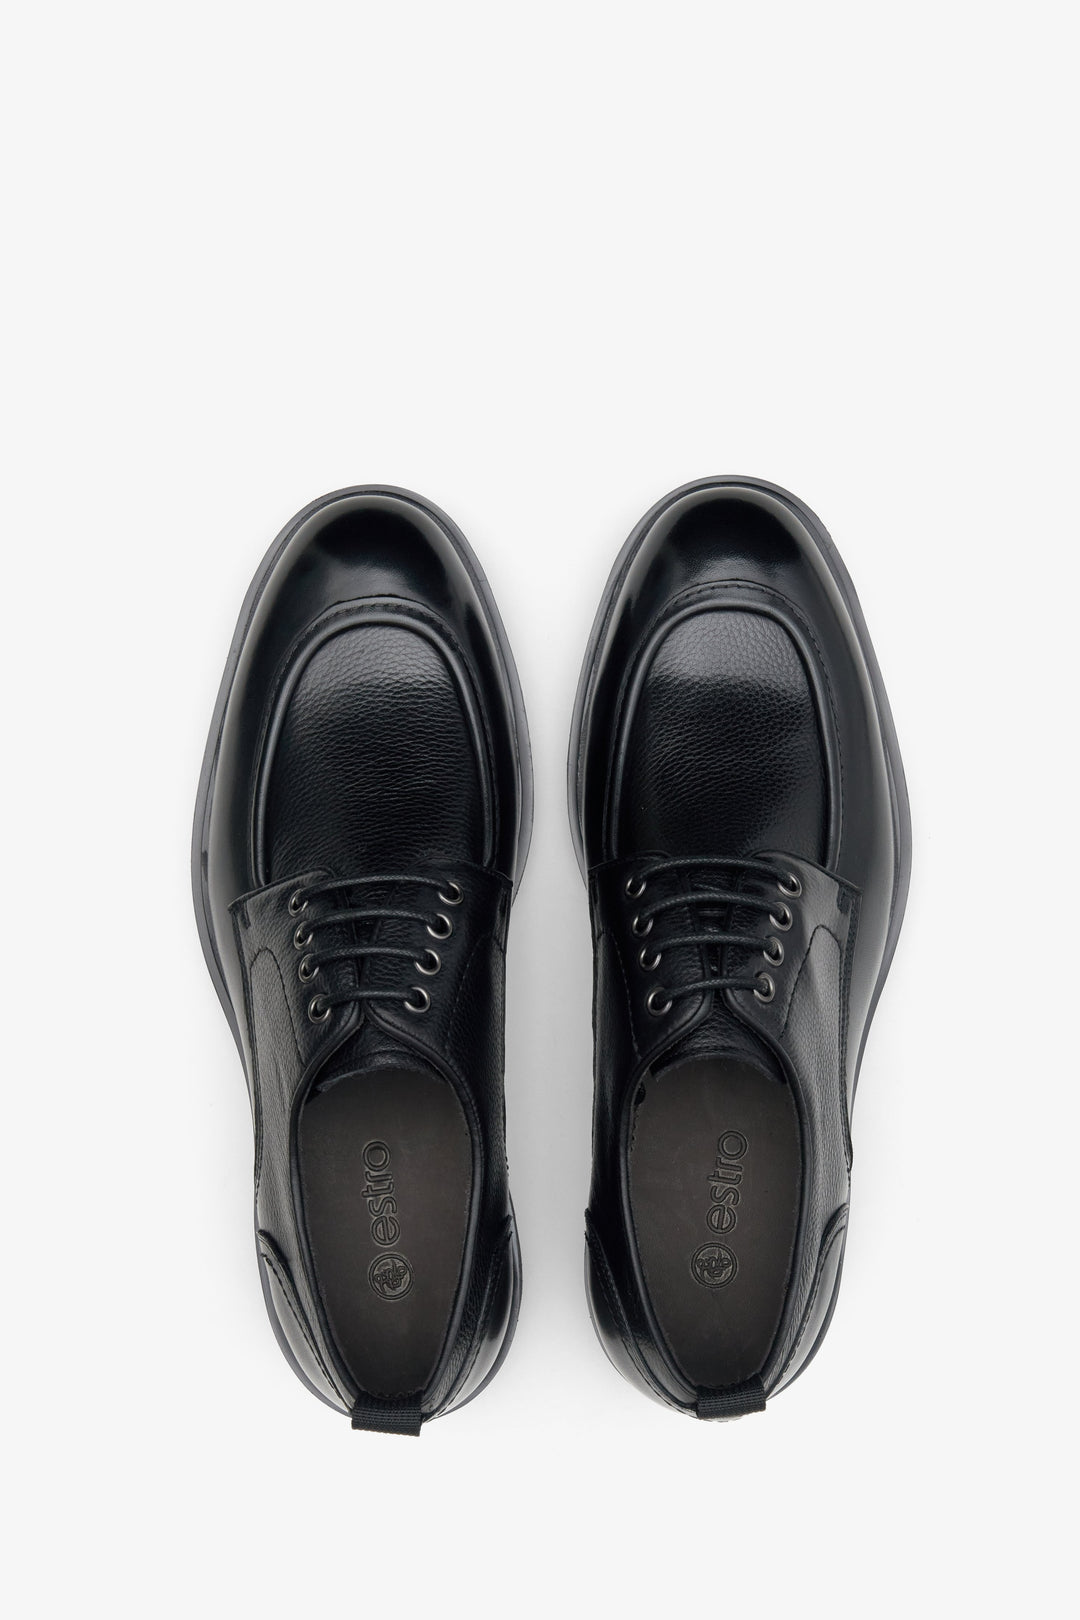 Estro black men's leather brogues with a short lace-up - top view presentation of the model.